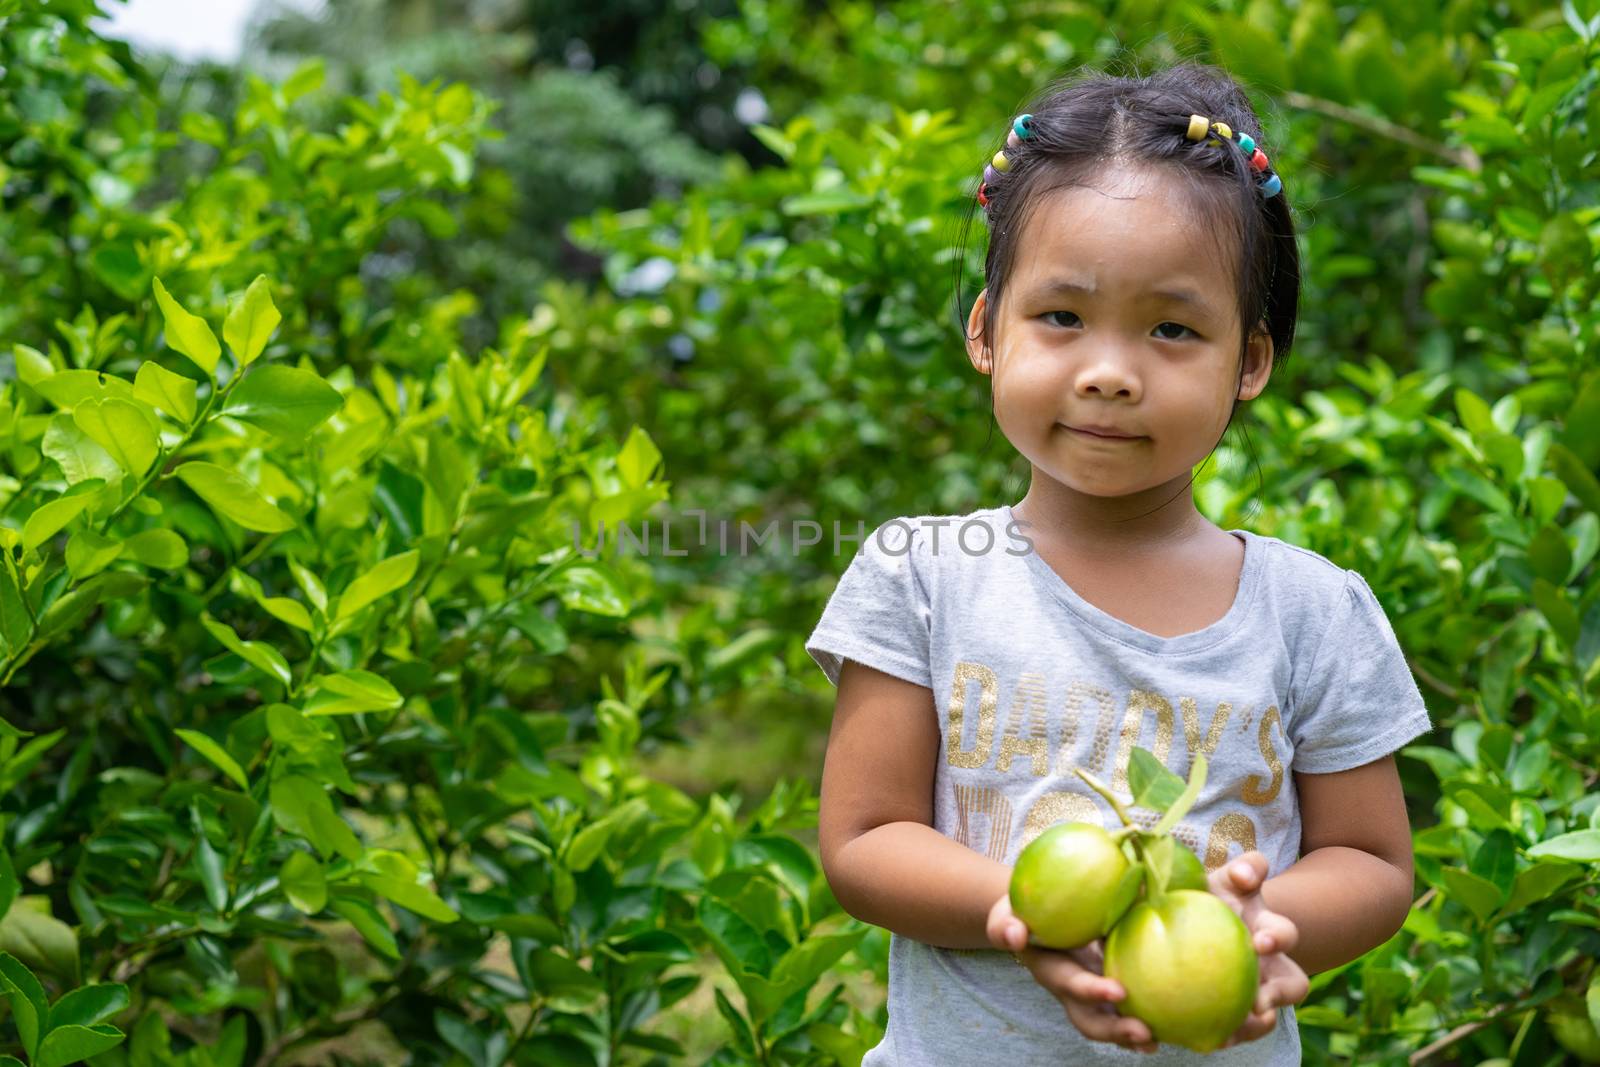 Green beautiful fresh limes in child's hand in the garden